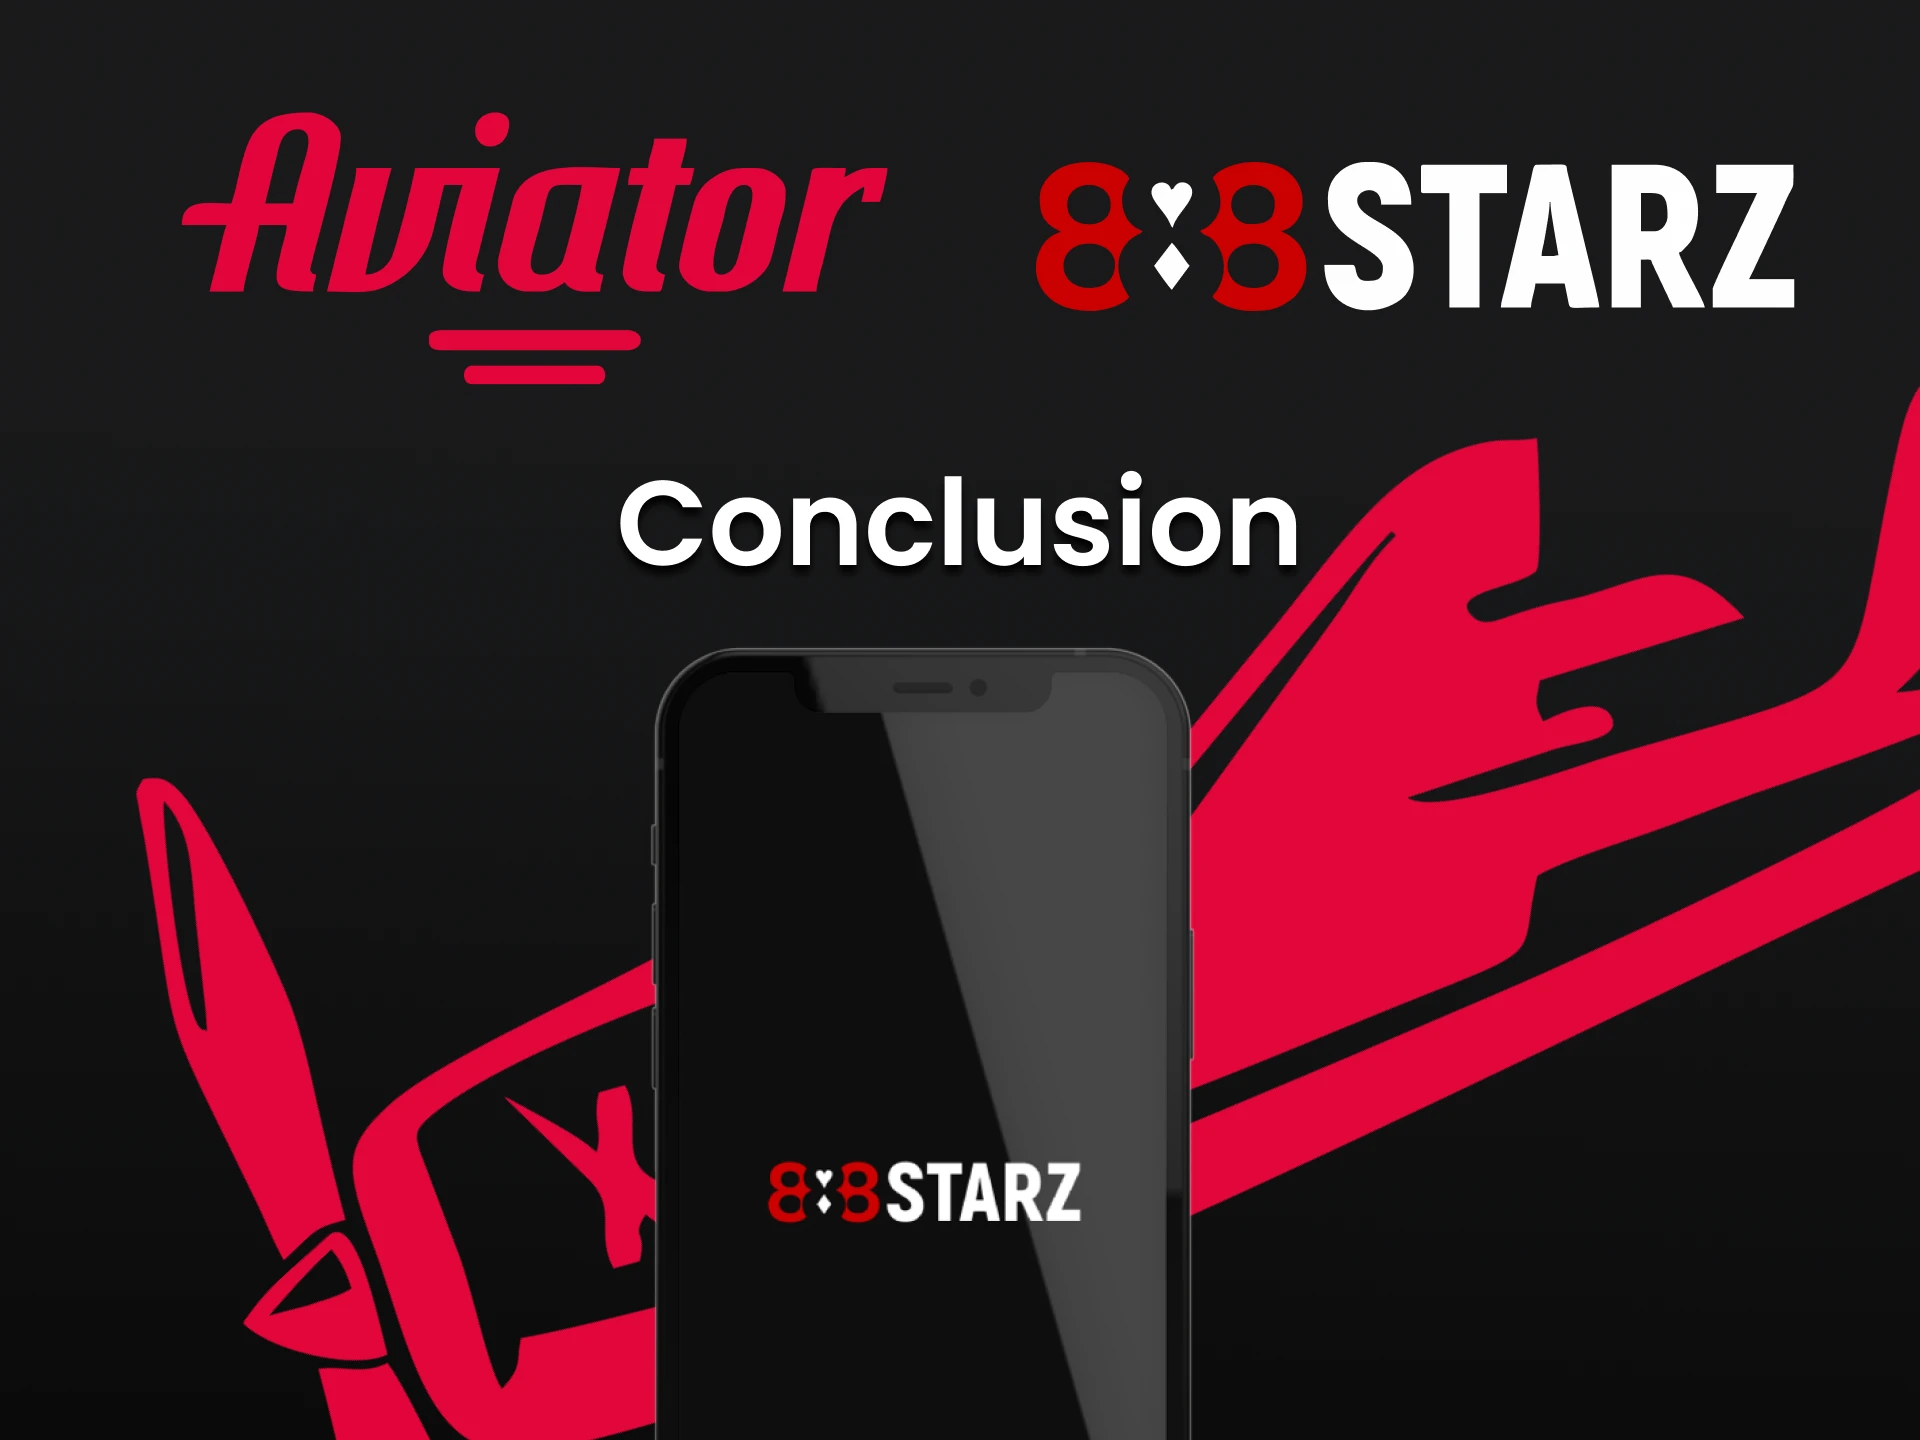 888starz is a handy application for playing Aviator game.